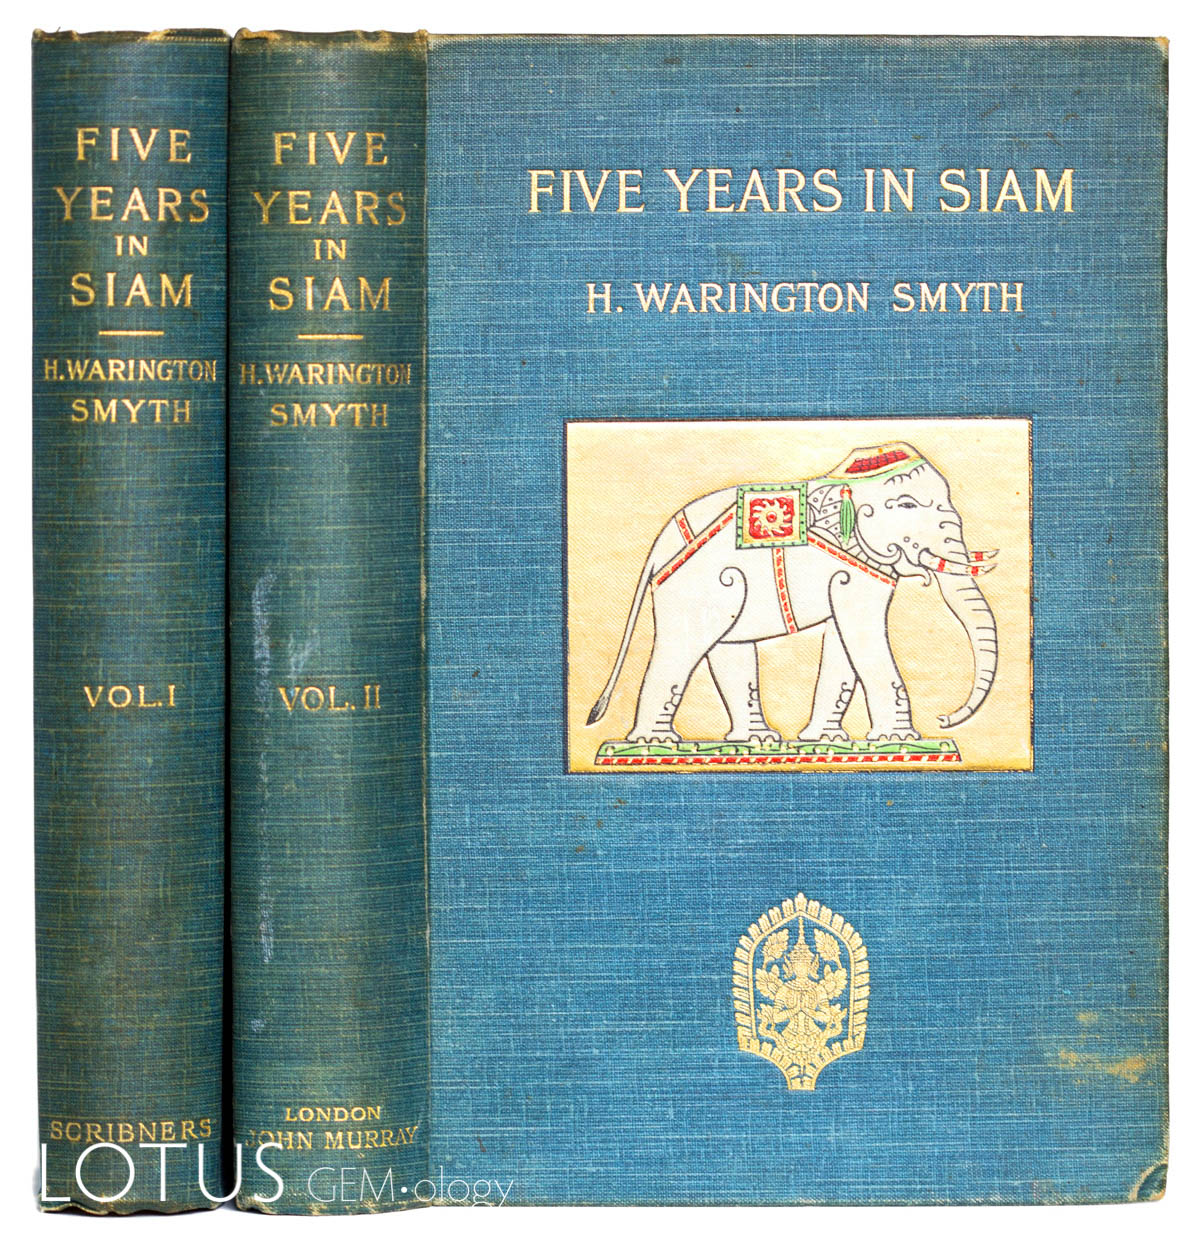 The finest 19th century resource on ruby and sapphire mining at Chanthaburi and Trat (Thailand) and Pailin (Cambodia) is H. Warington Smyth's Five Years in Siam (1898). It is highly sought after for its many plates, maps and decorative cover. Click on the photo for a larger image.